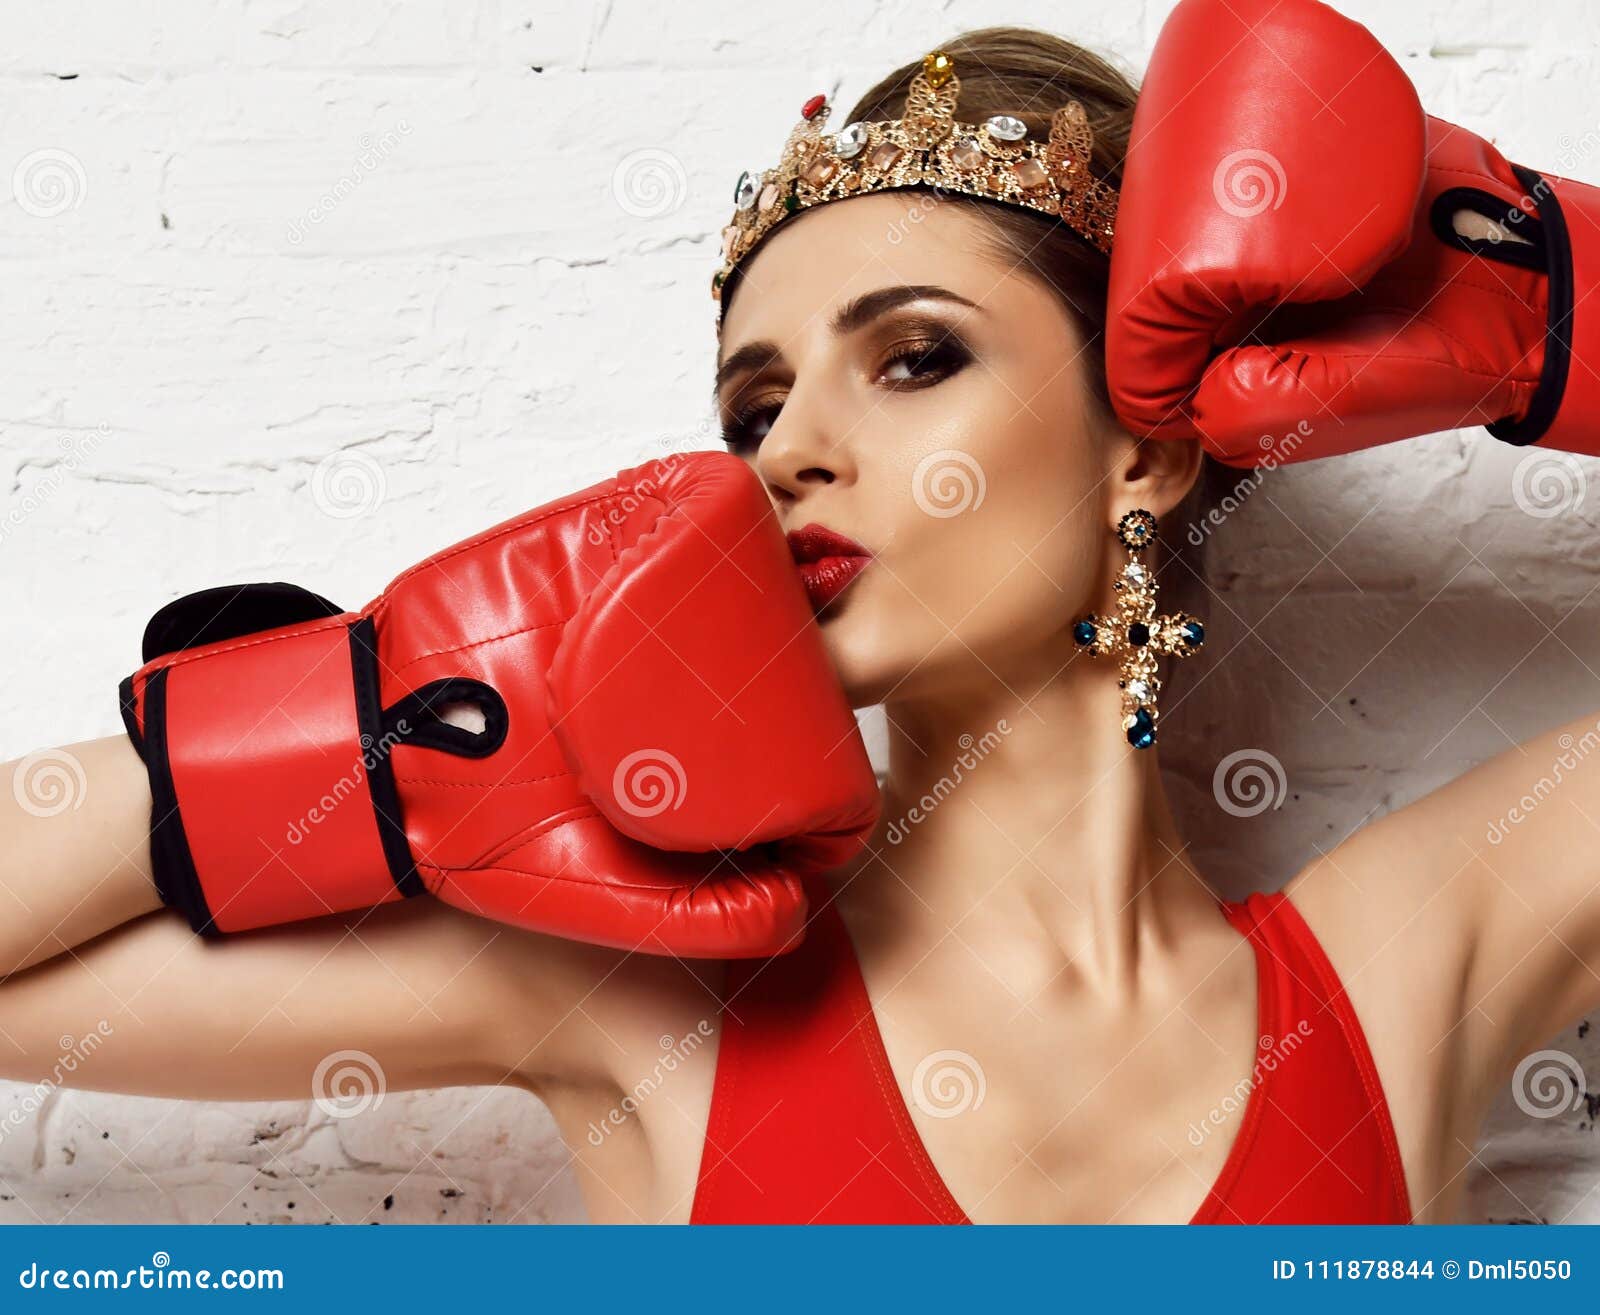 beautiful glamour sexy woman red boxing gloves fashion gold crown earrings brick wall beautiful glamour sexy woman 111878844